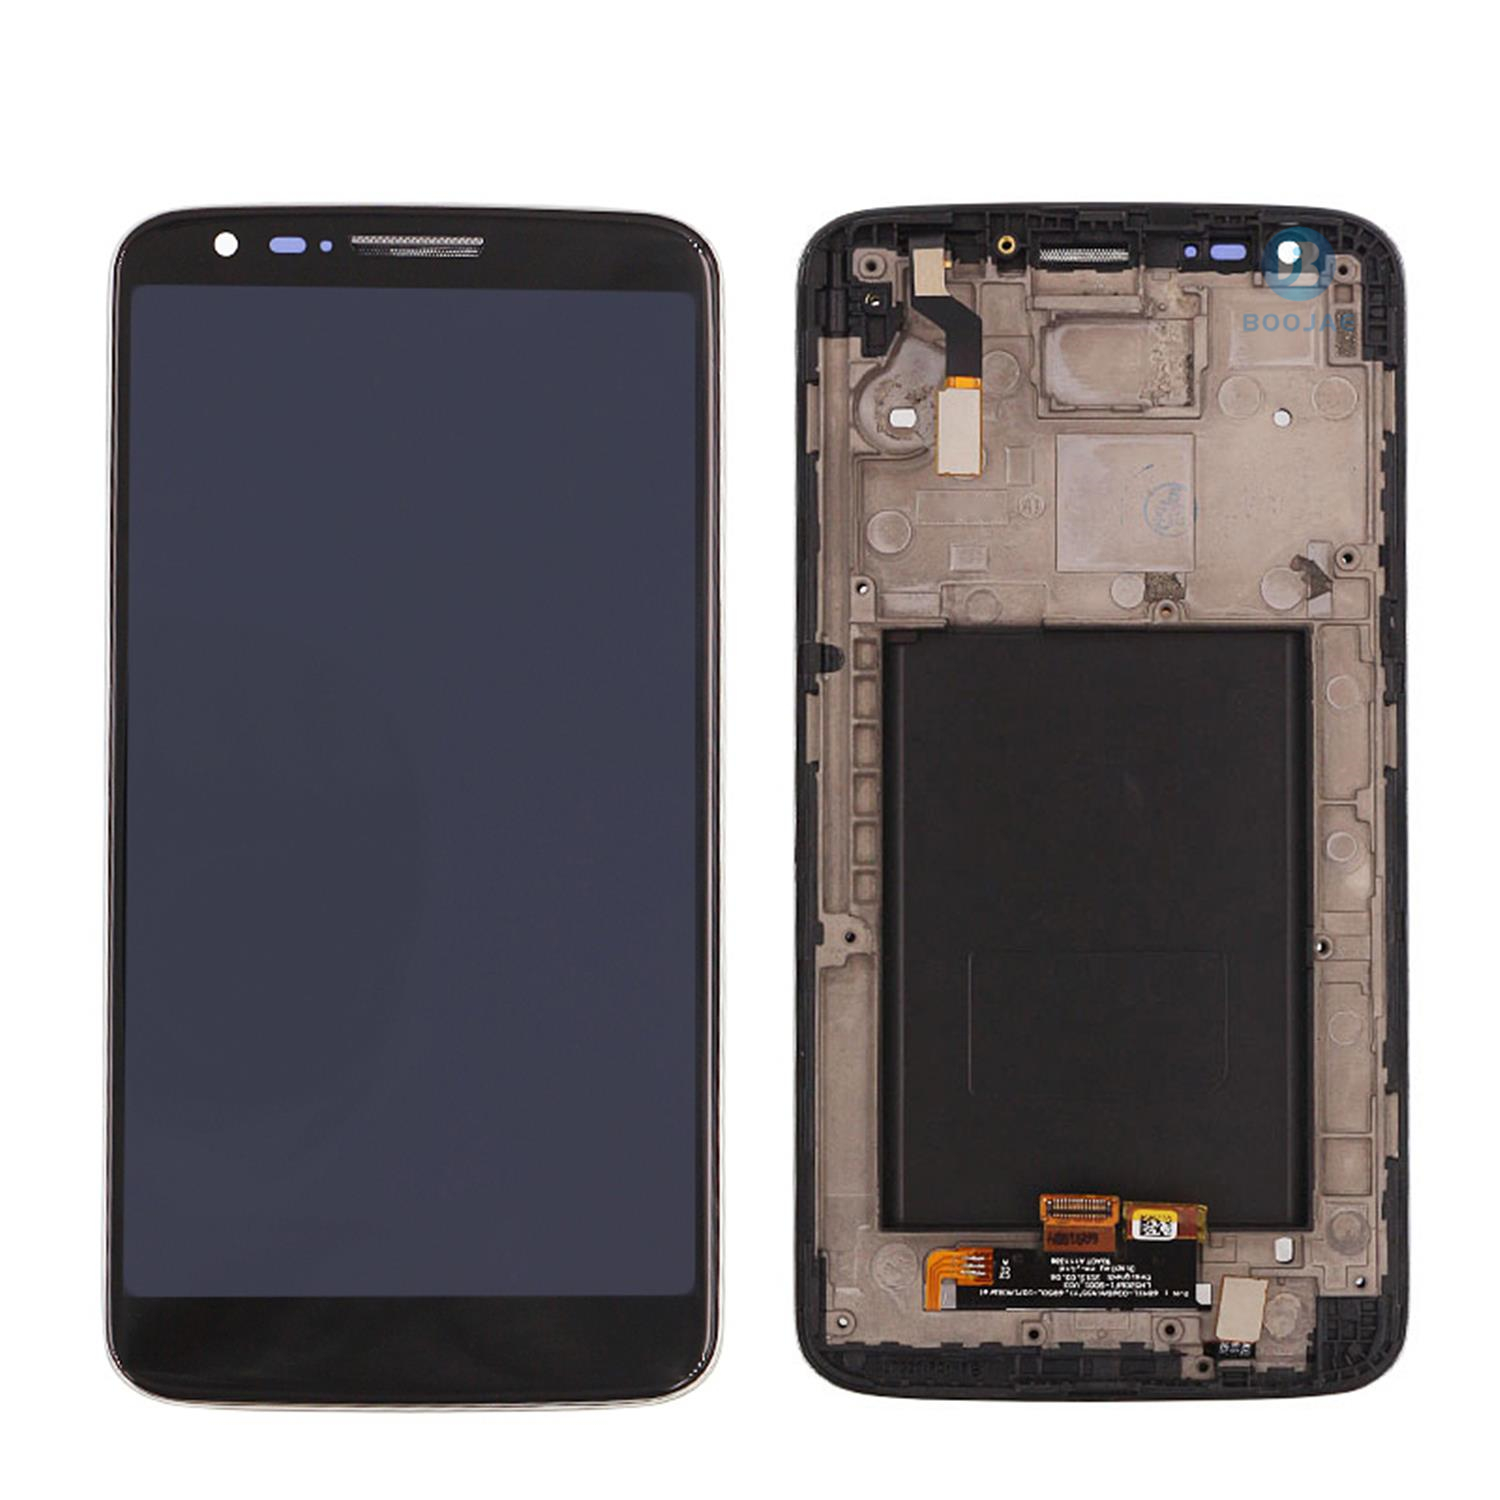 LG G2 F320 LCD Screen Display, Lcd Assembly Replacement